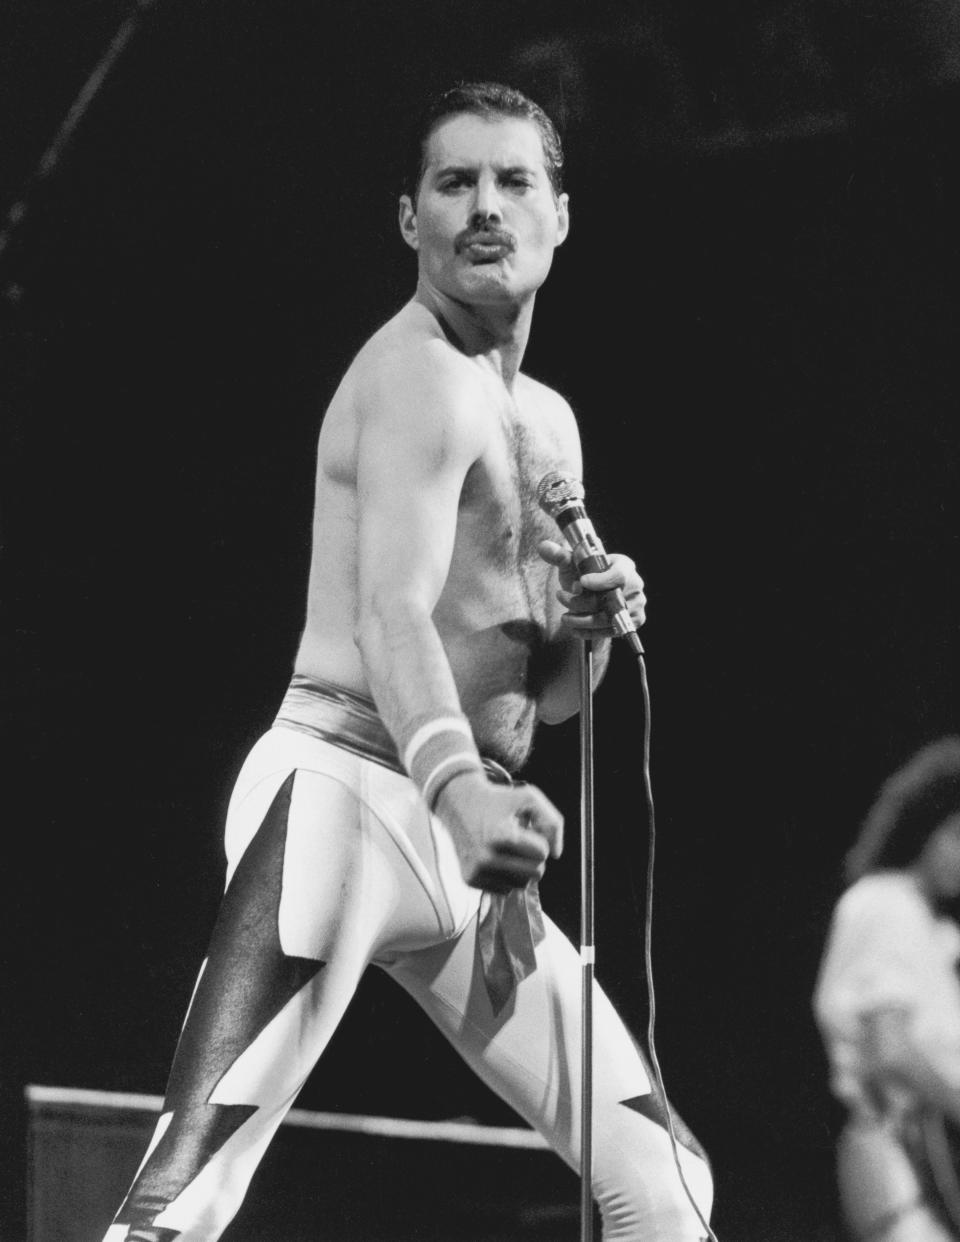 (FILE PHOTO) 65 Yrs Since The Birth Of Freddie Mercury Of Queen - Queen's Last Five Studio Albums Reissued - Sept 5th